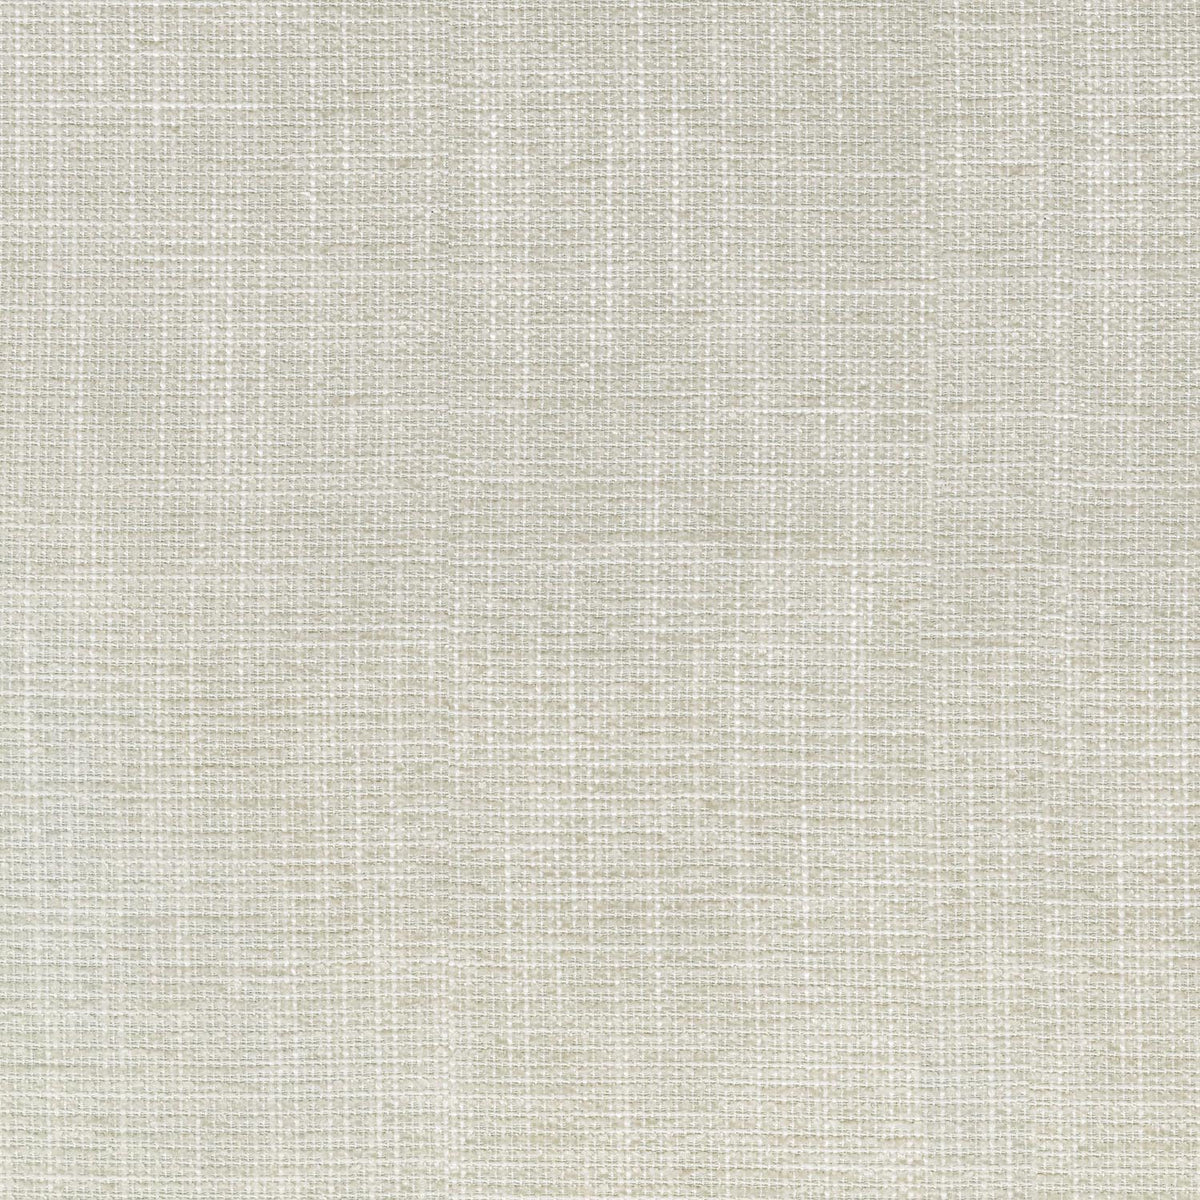 P/K Lifestyles Layla - Coconut 410243 Upholstery Fabric